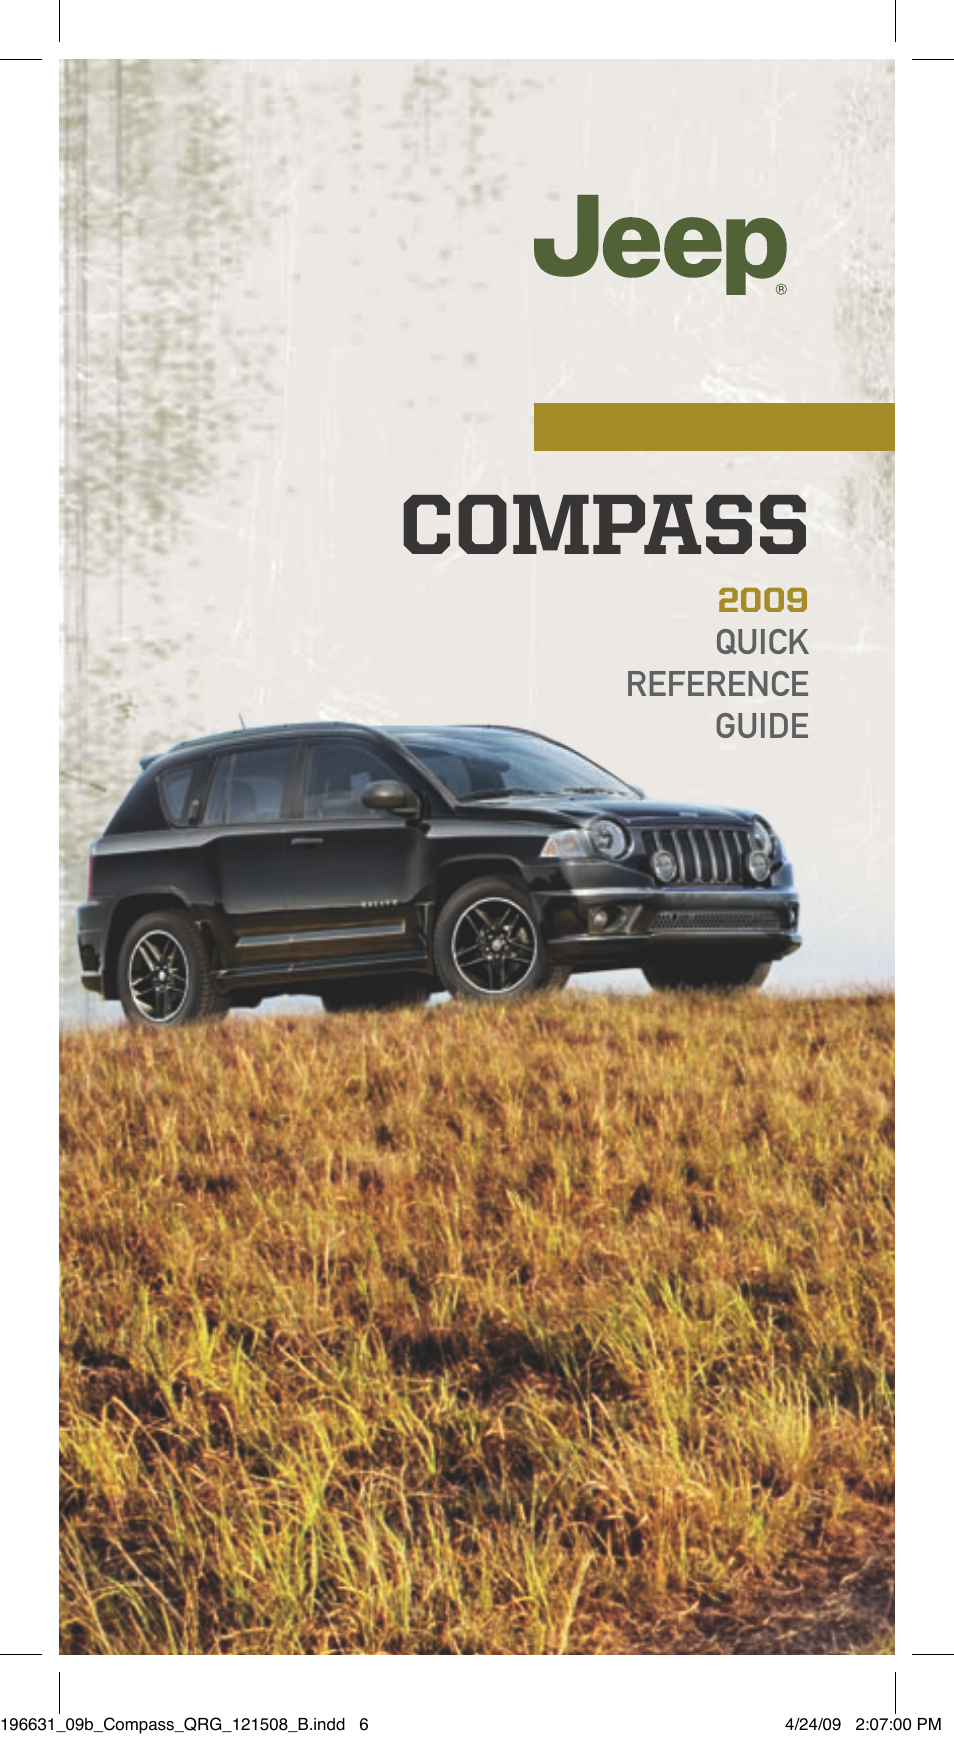 2009 Compass - Quick Reference Guide